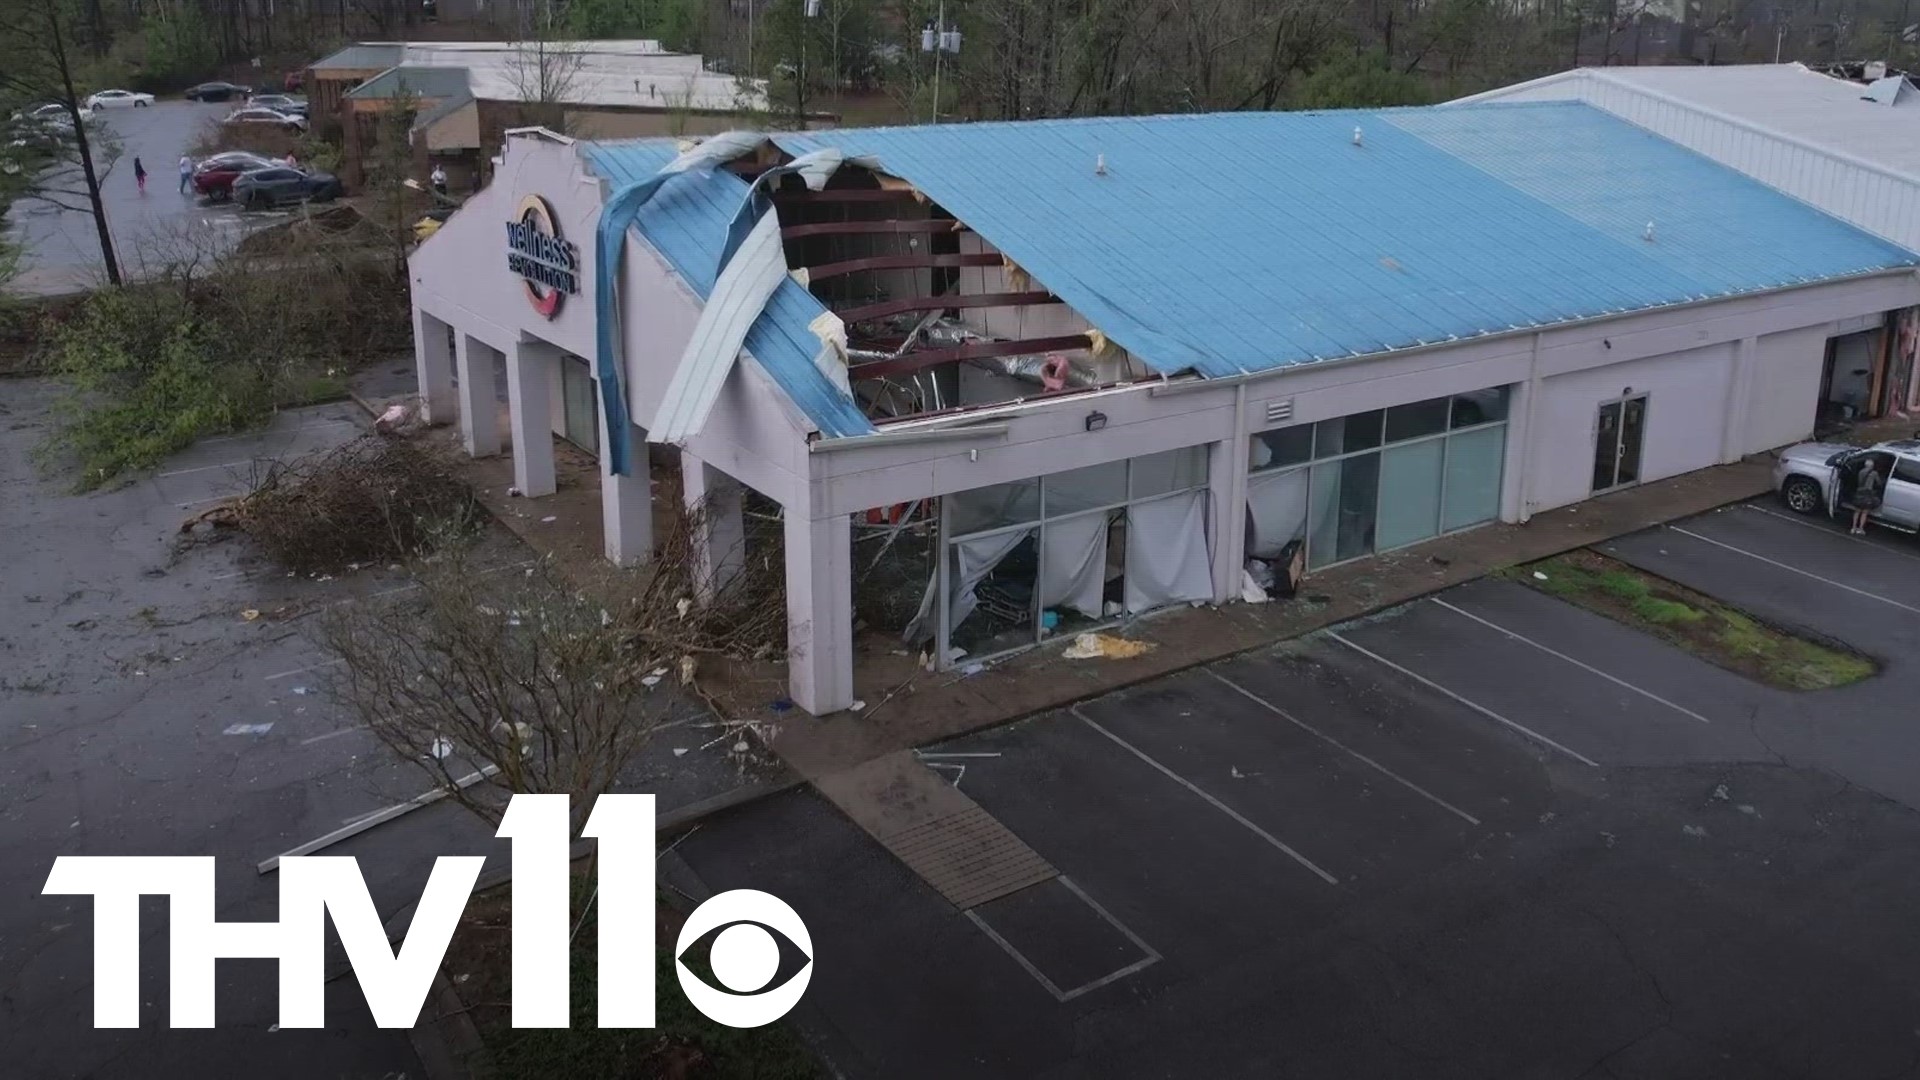 Arkansans are still rebuilding and recovering from the tornado in March, and now one Little Rock gym is sharing its struggles as it tries to reopen its doors.